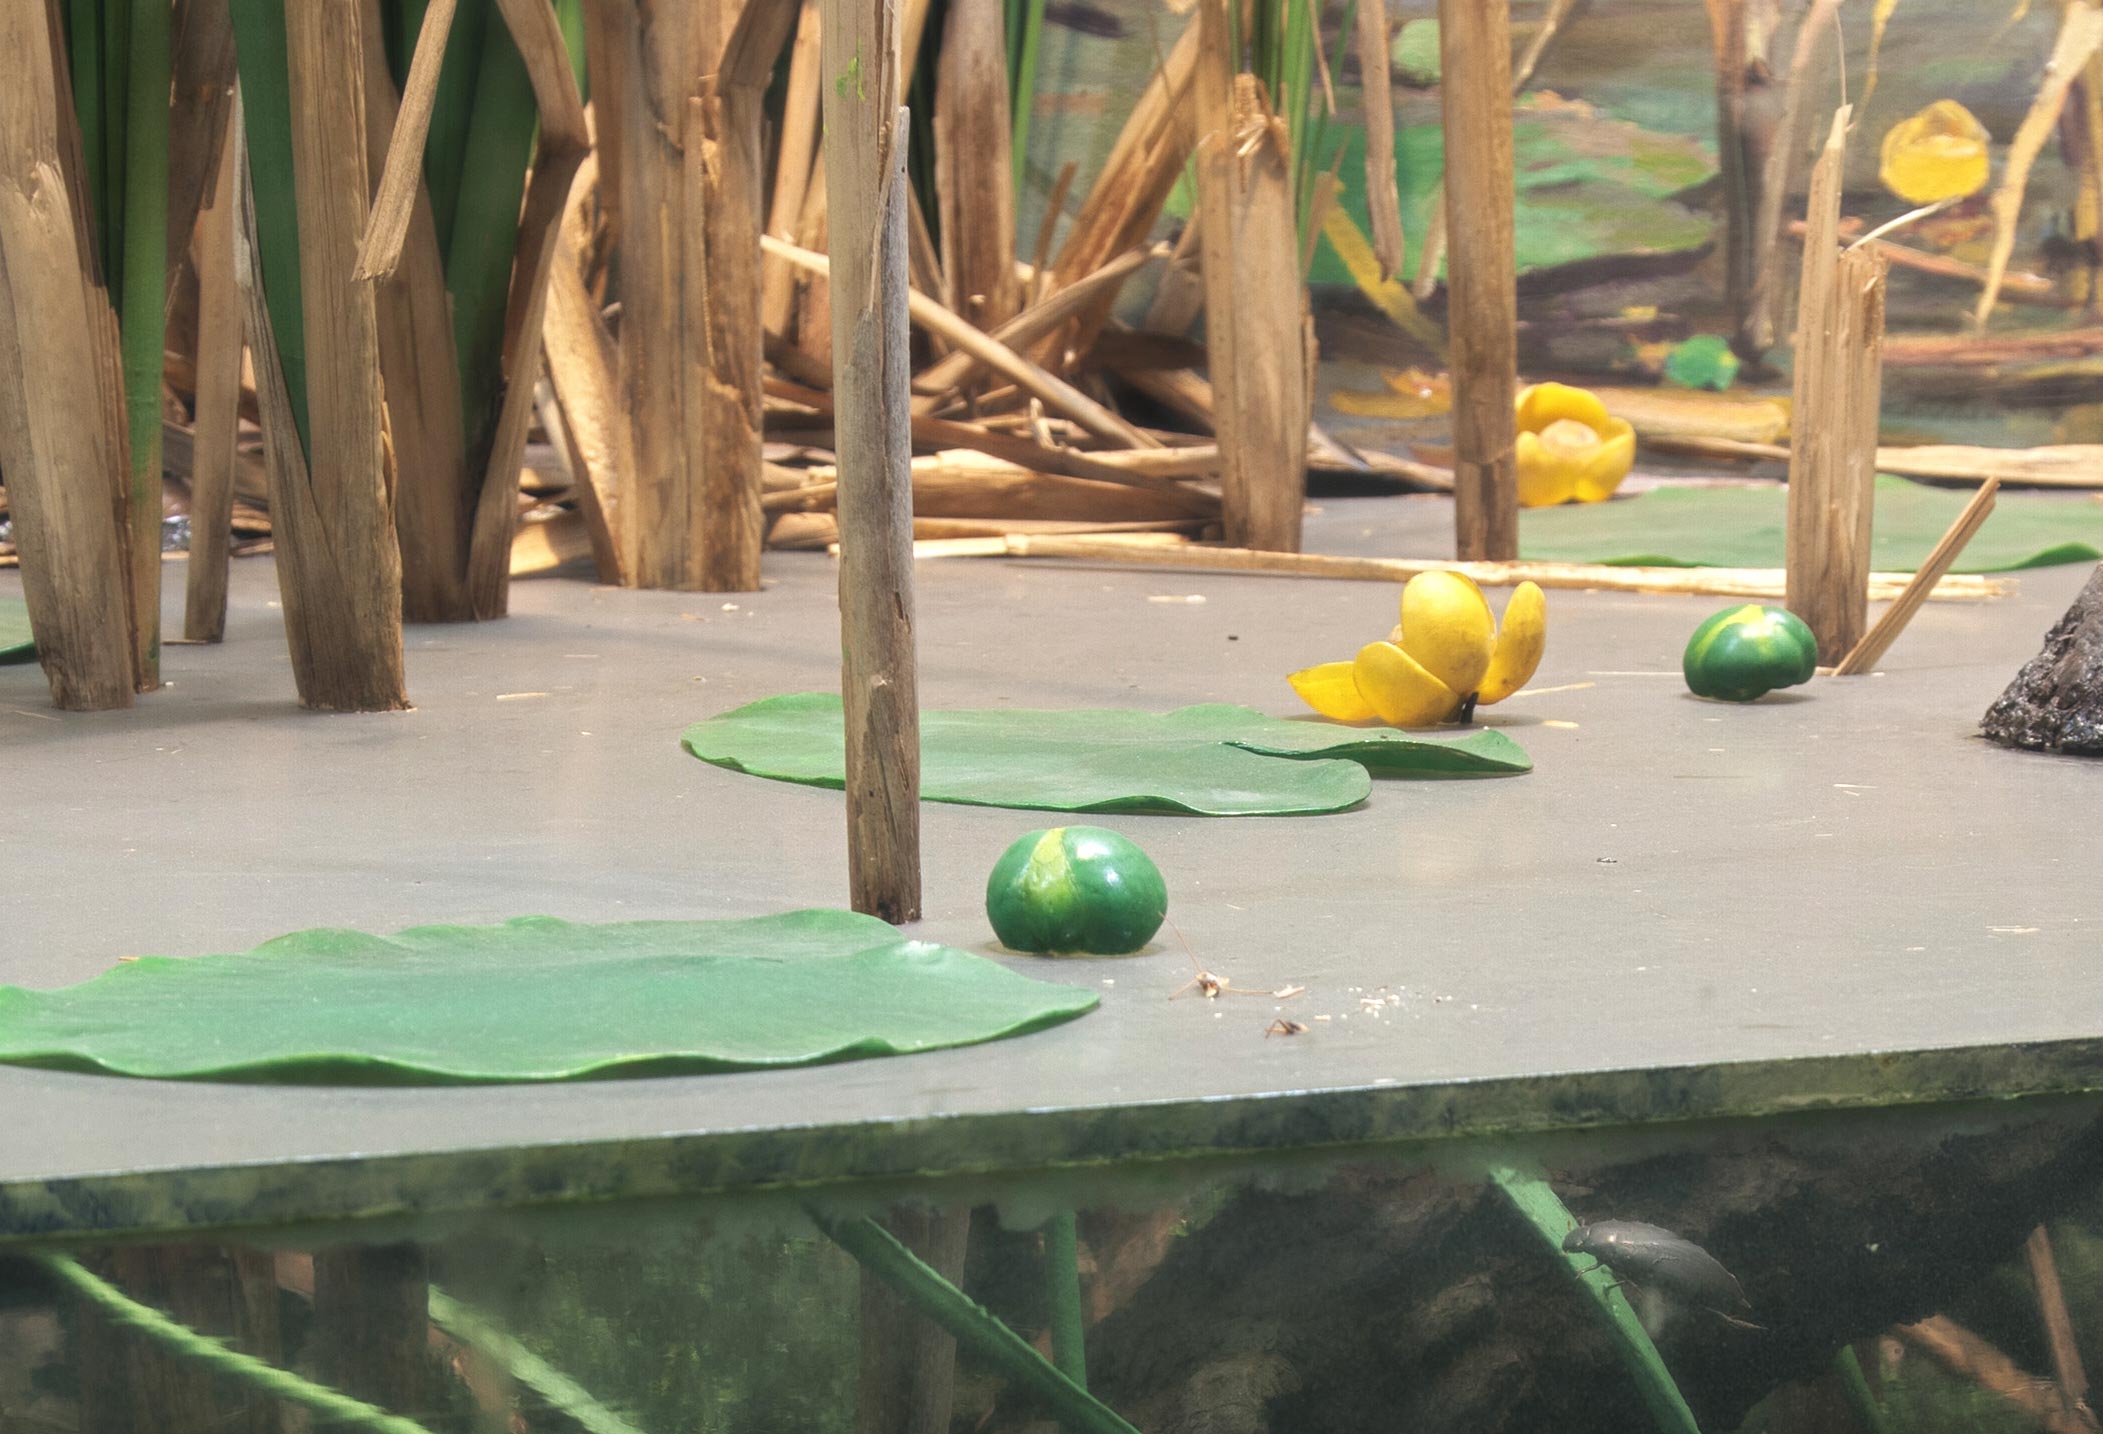 Section of a diorama showing yellow lily pads on the surface of a lake.